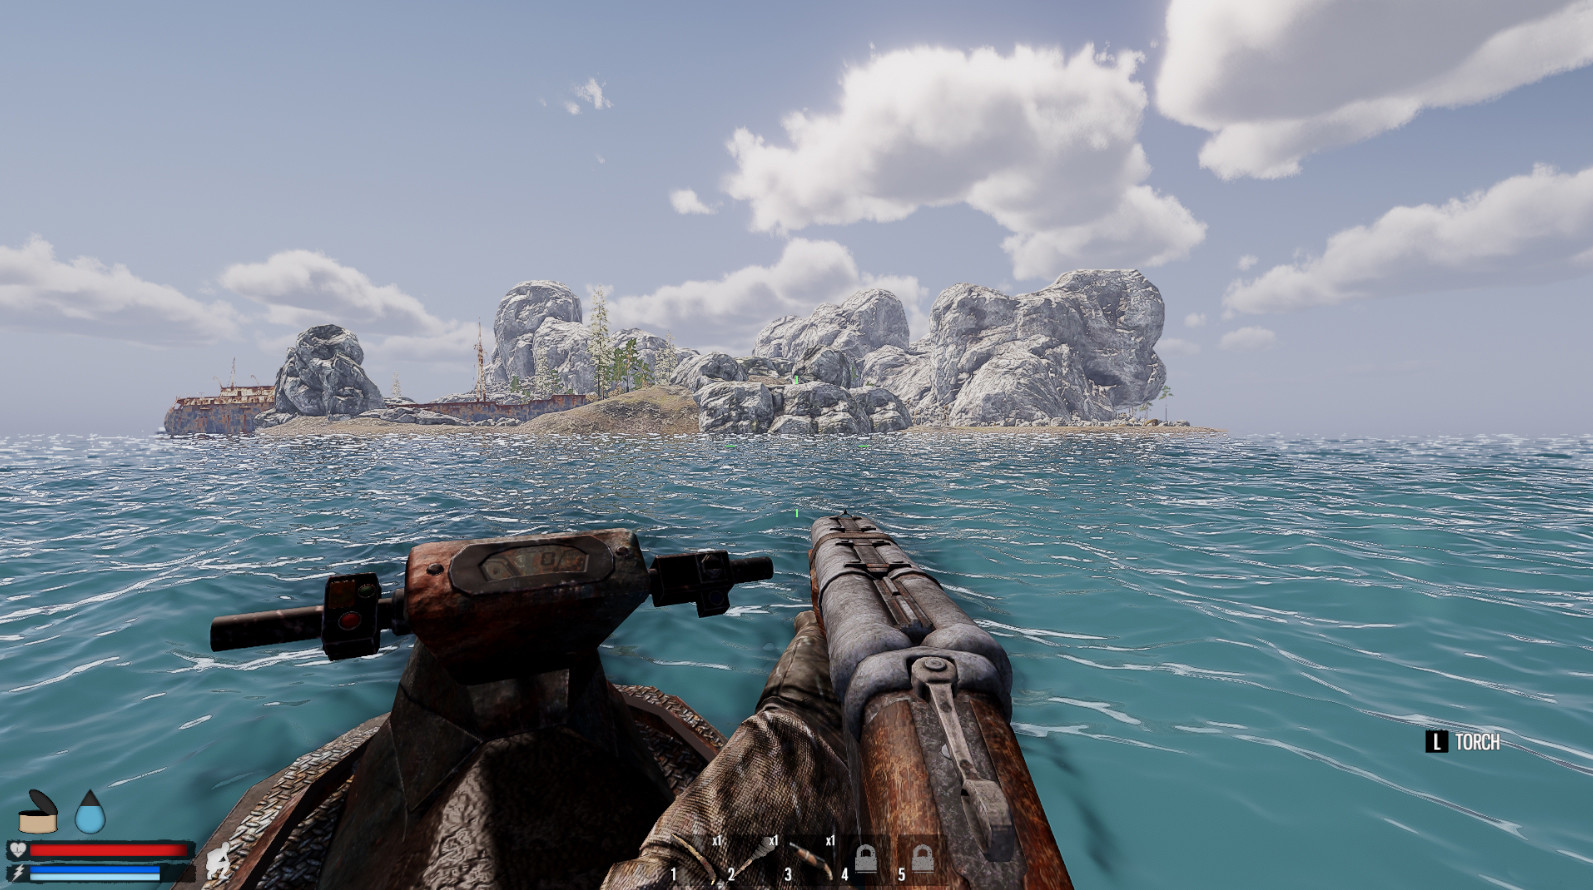 An image from flooded world survival game Sunkenland